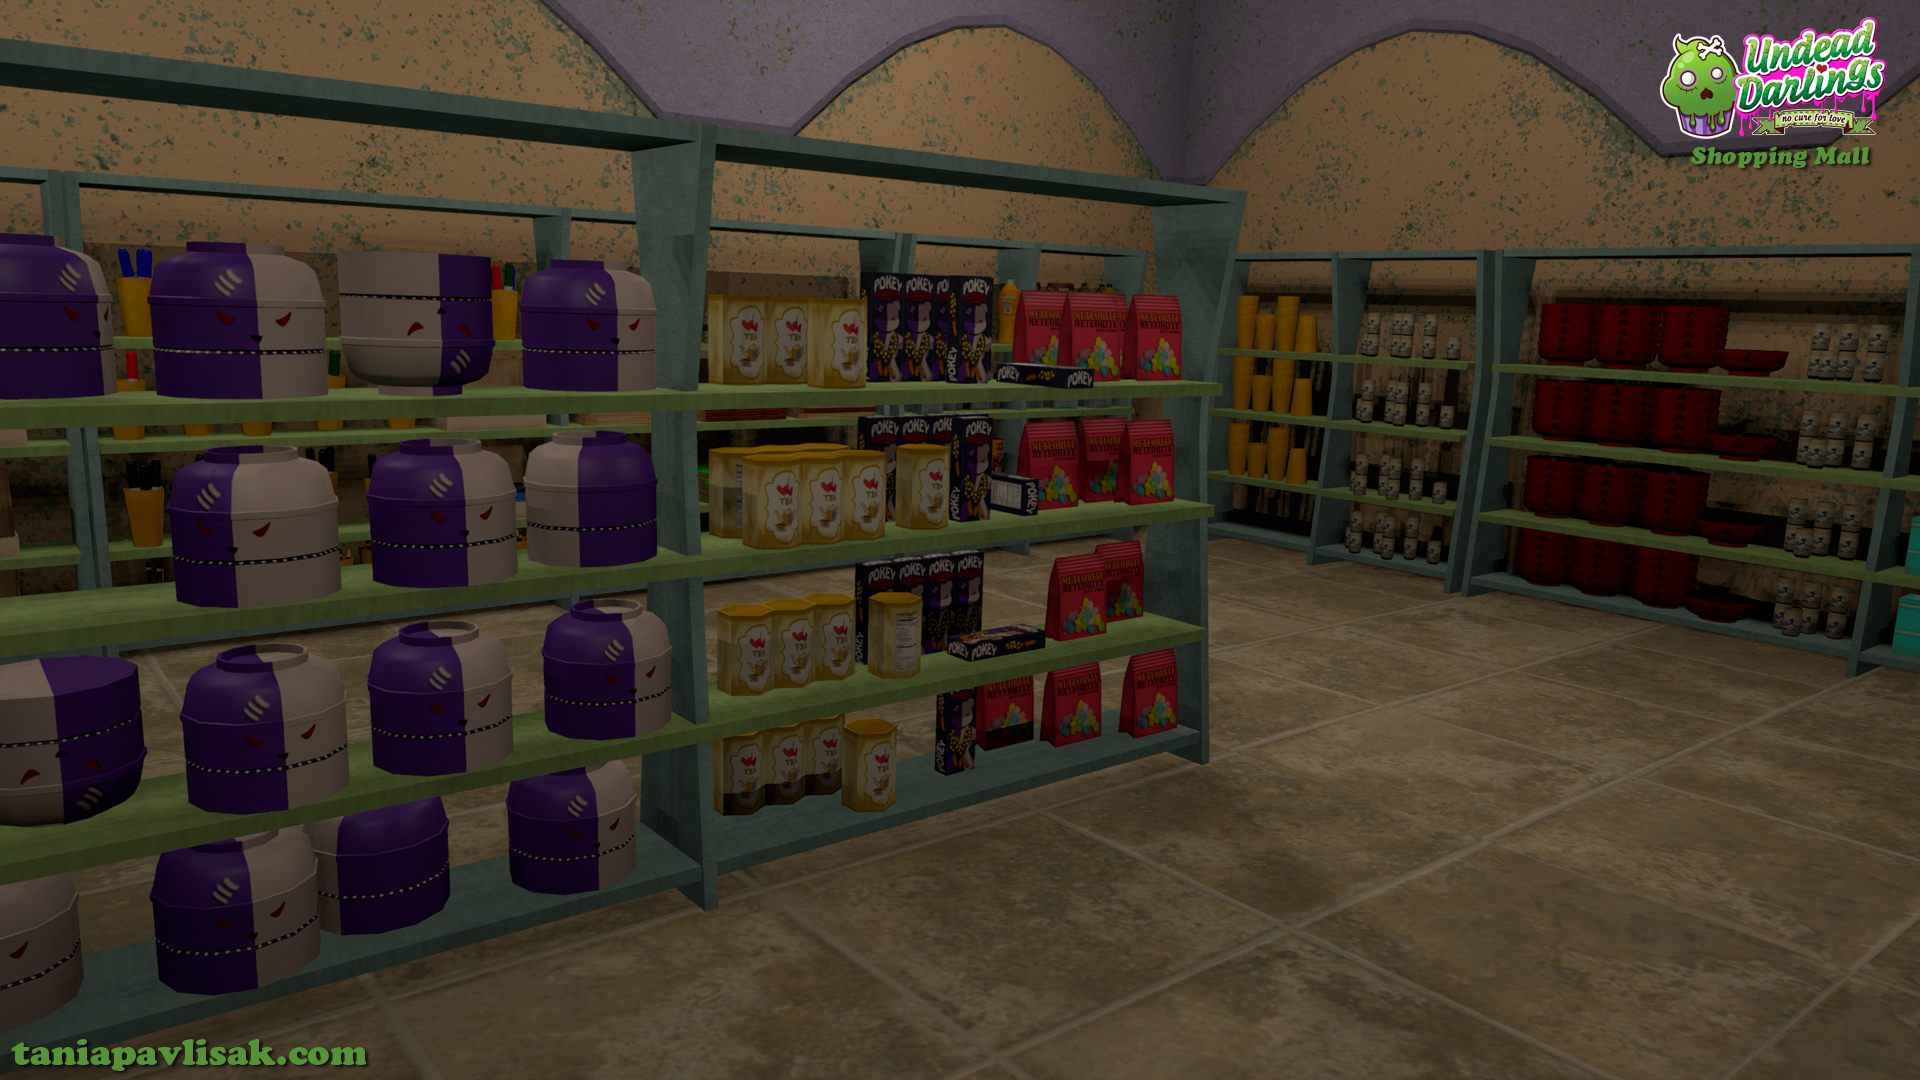 Miscellaneous snacks and household items in sundry store